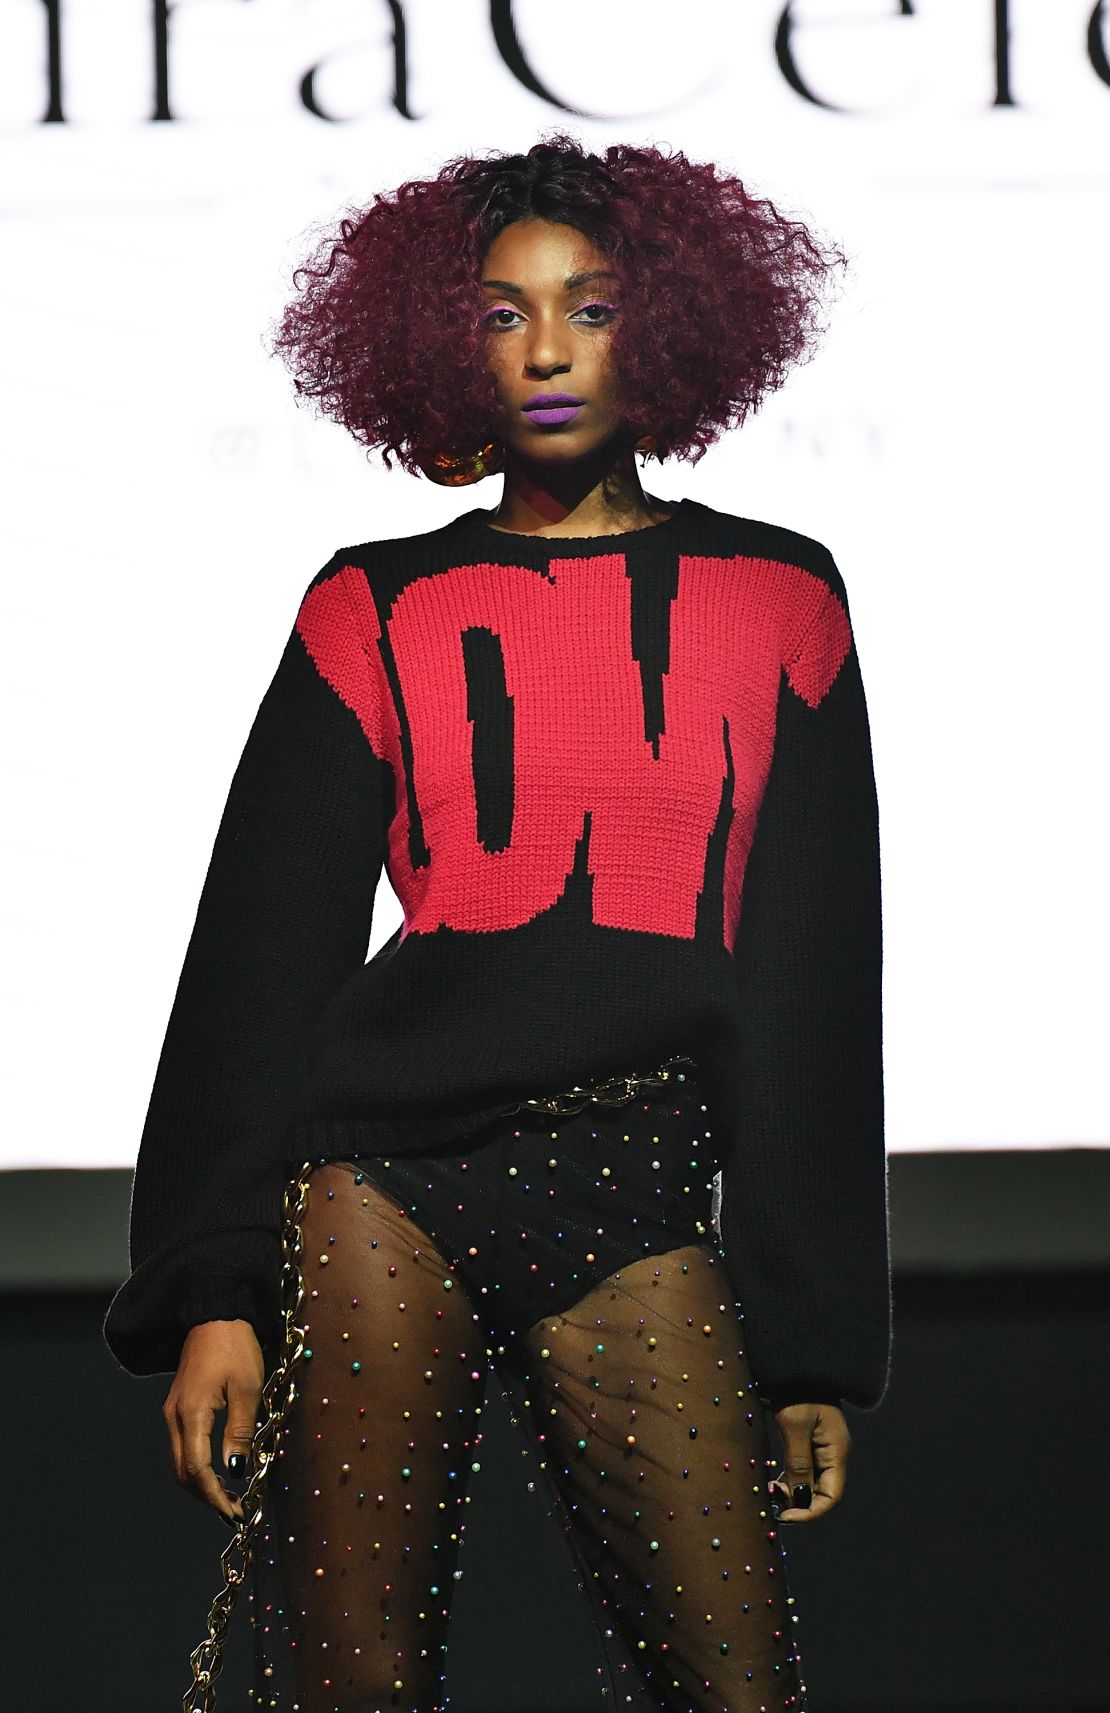 A model walks the runway at the Undra Celeste fashion show, hosted by Harlem's Fashion Row, in September 2018.